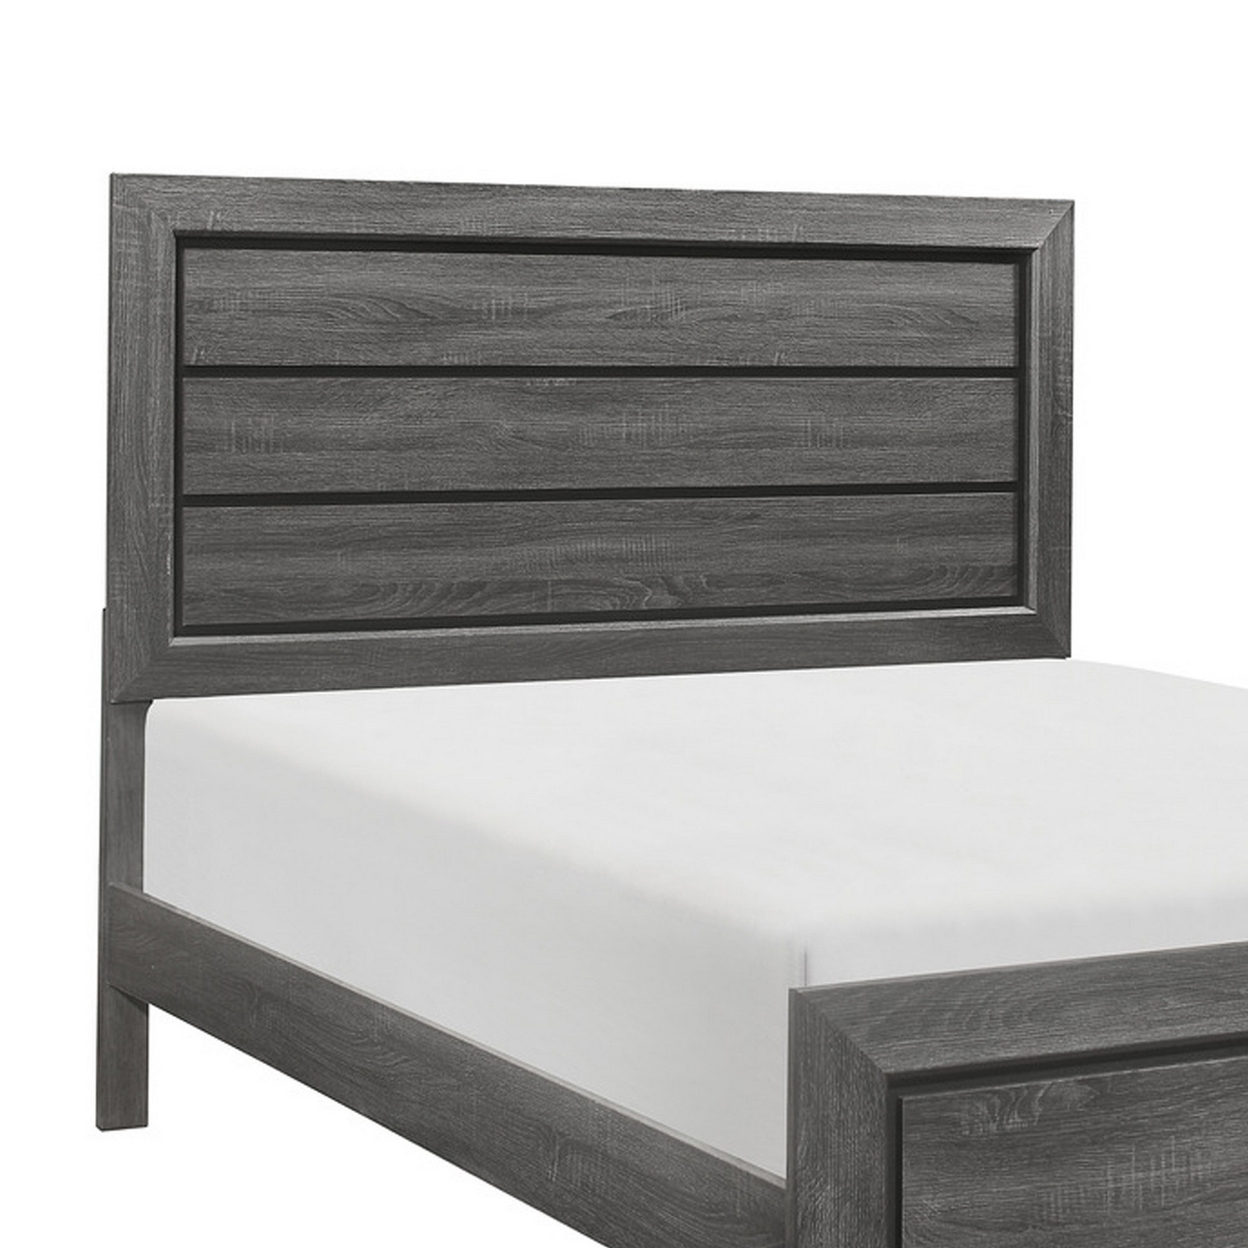 Erin Contemporary Queen Bed, Embossed Faux Wood Veneer, Smooth Gray Finish- Saltoro Sherpi